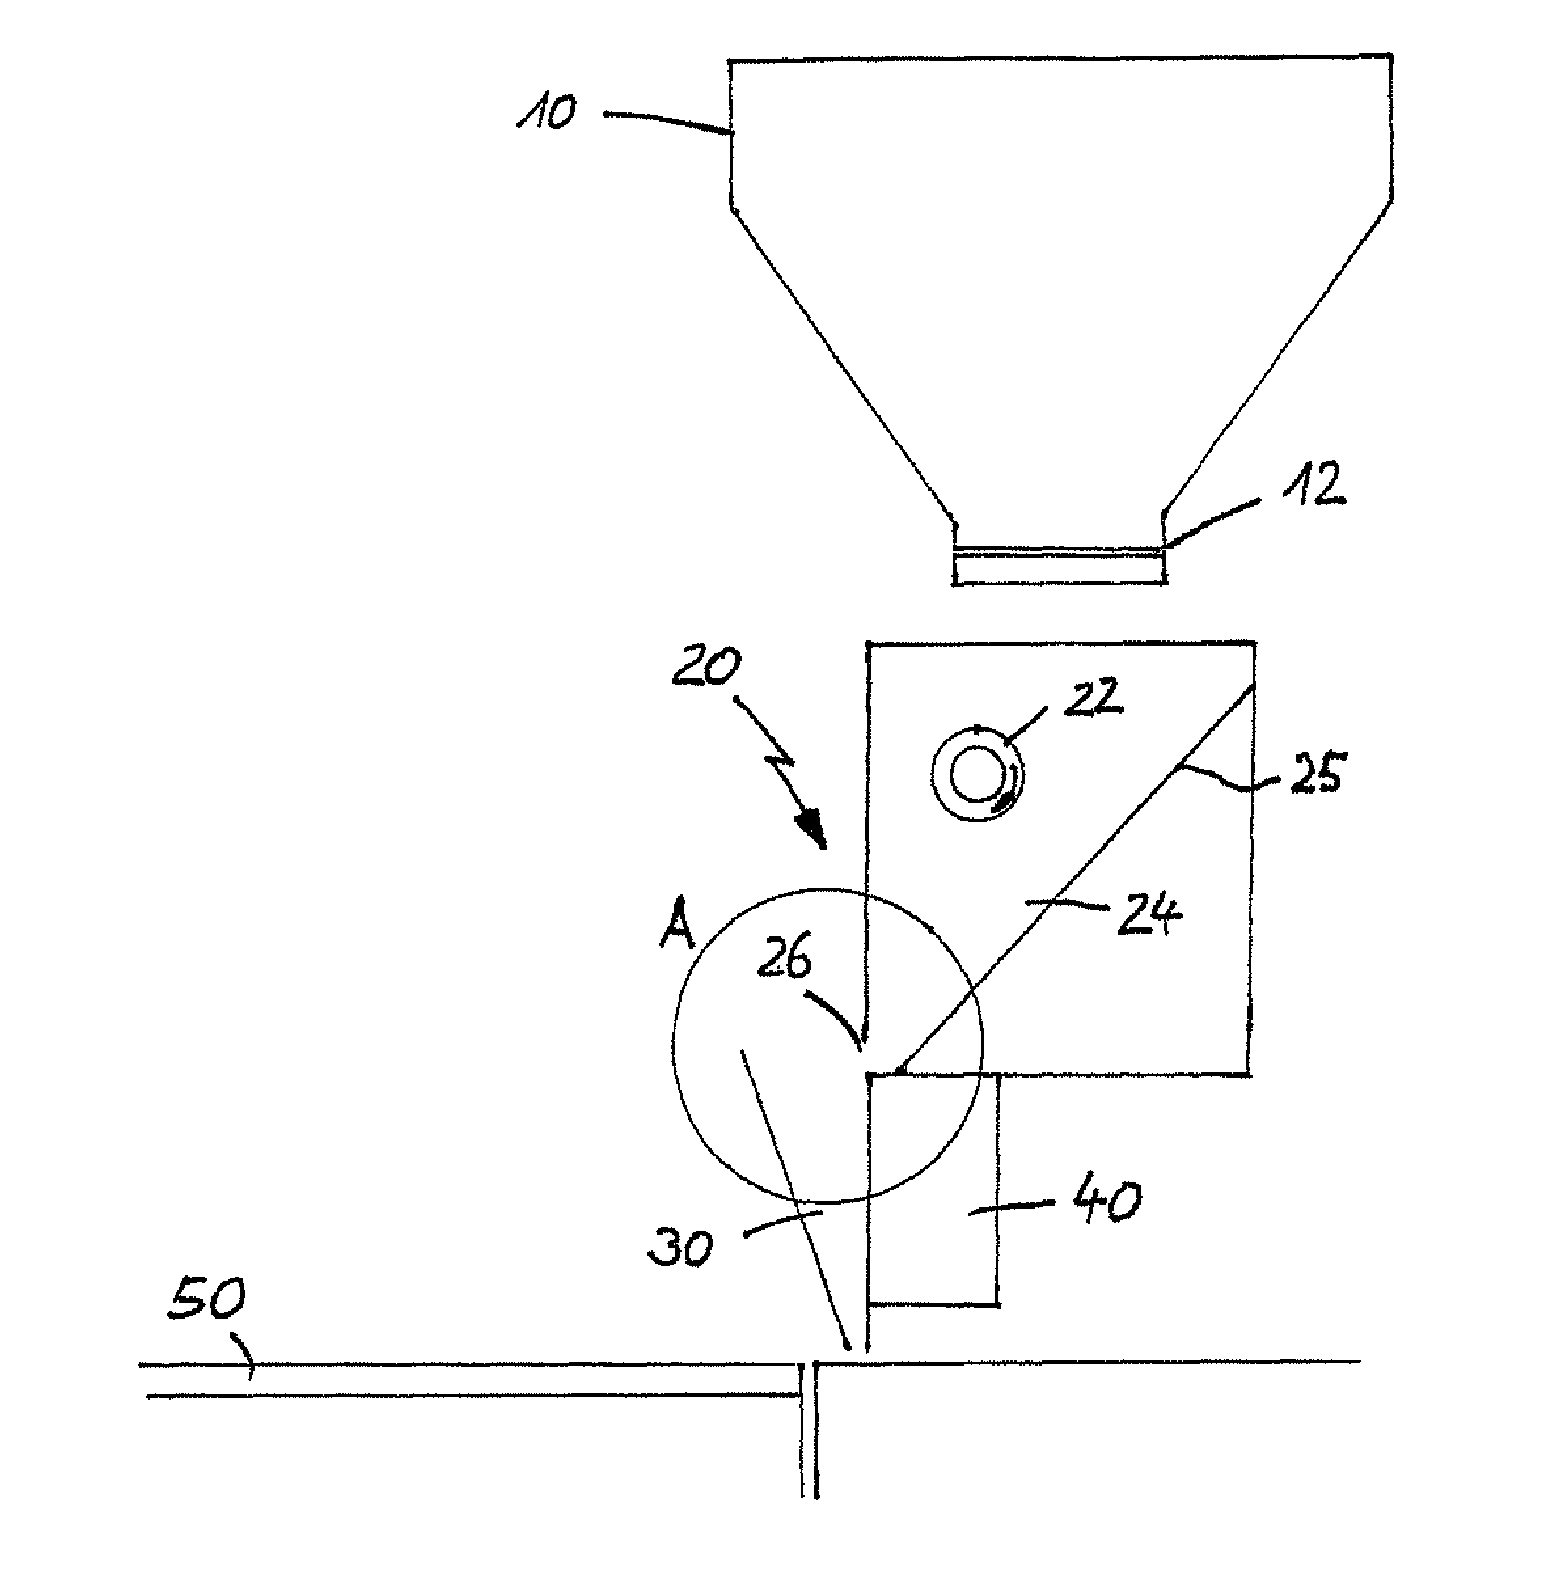 Method of, and apparatus for, applying flowable material across a surface